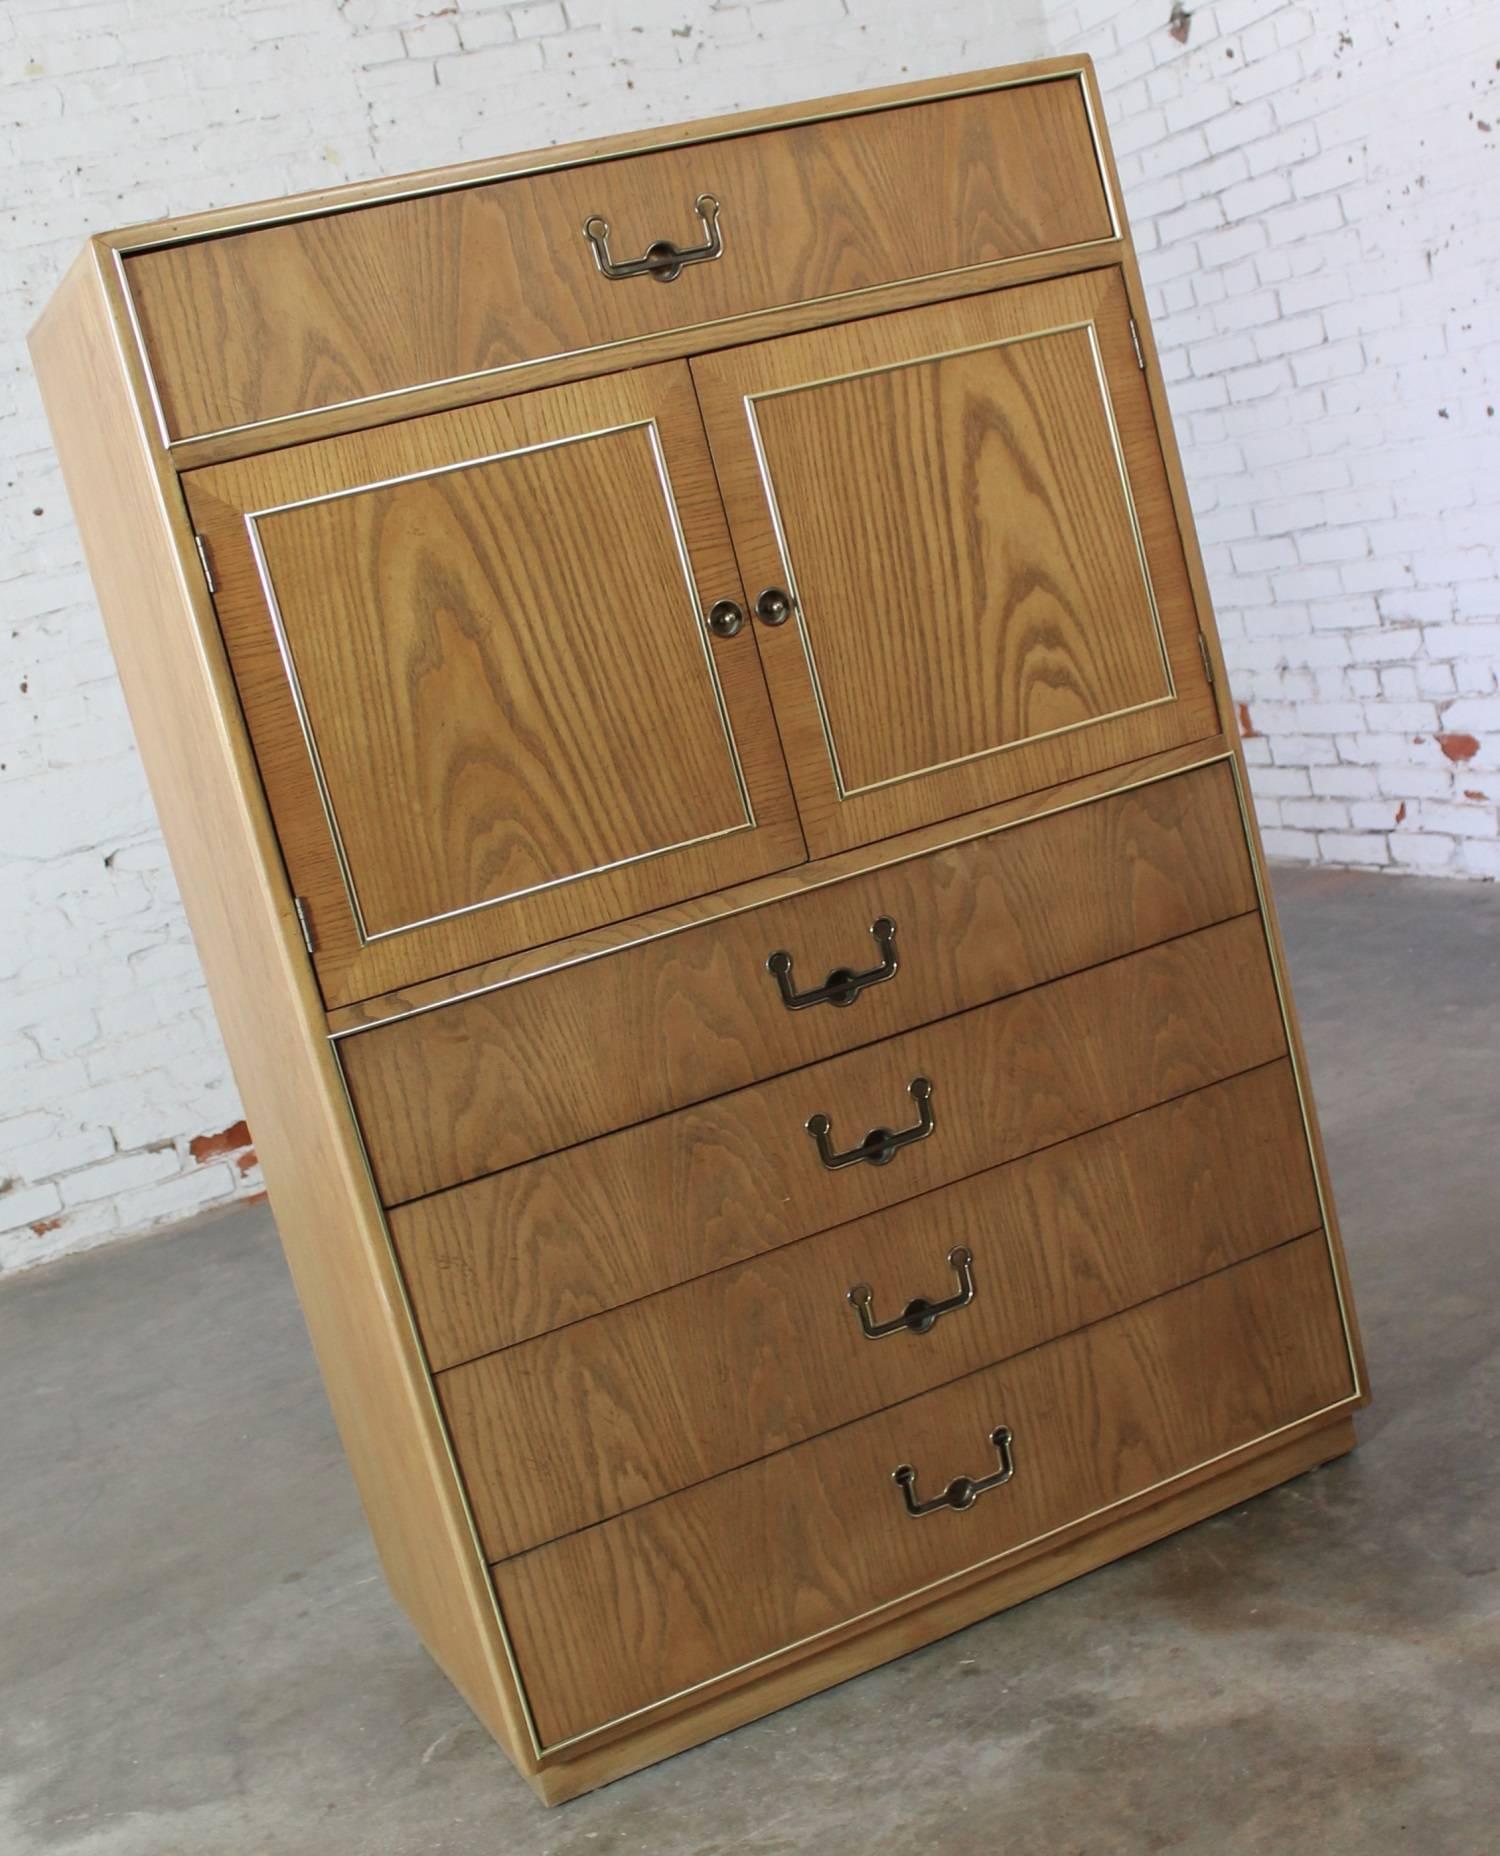 Handsome vintage Mid-Century Campaign style gentlemen’s chest by Founders Furniture done in oak with antique brass colored hardware. This piece is in wonderful vintage condition, circa 1970.

This vintage Founders Furniture company gentlemen’s chest